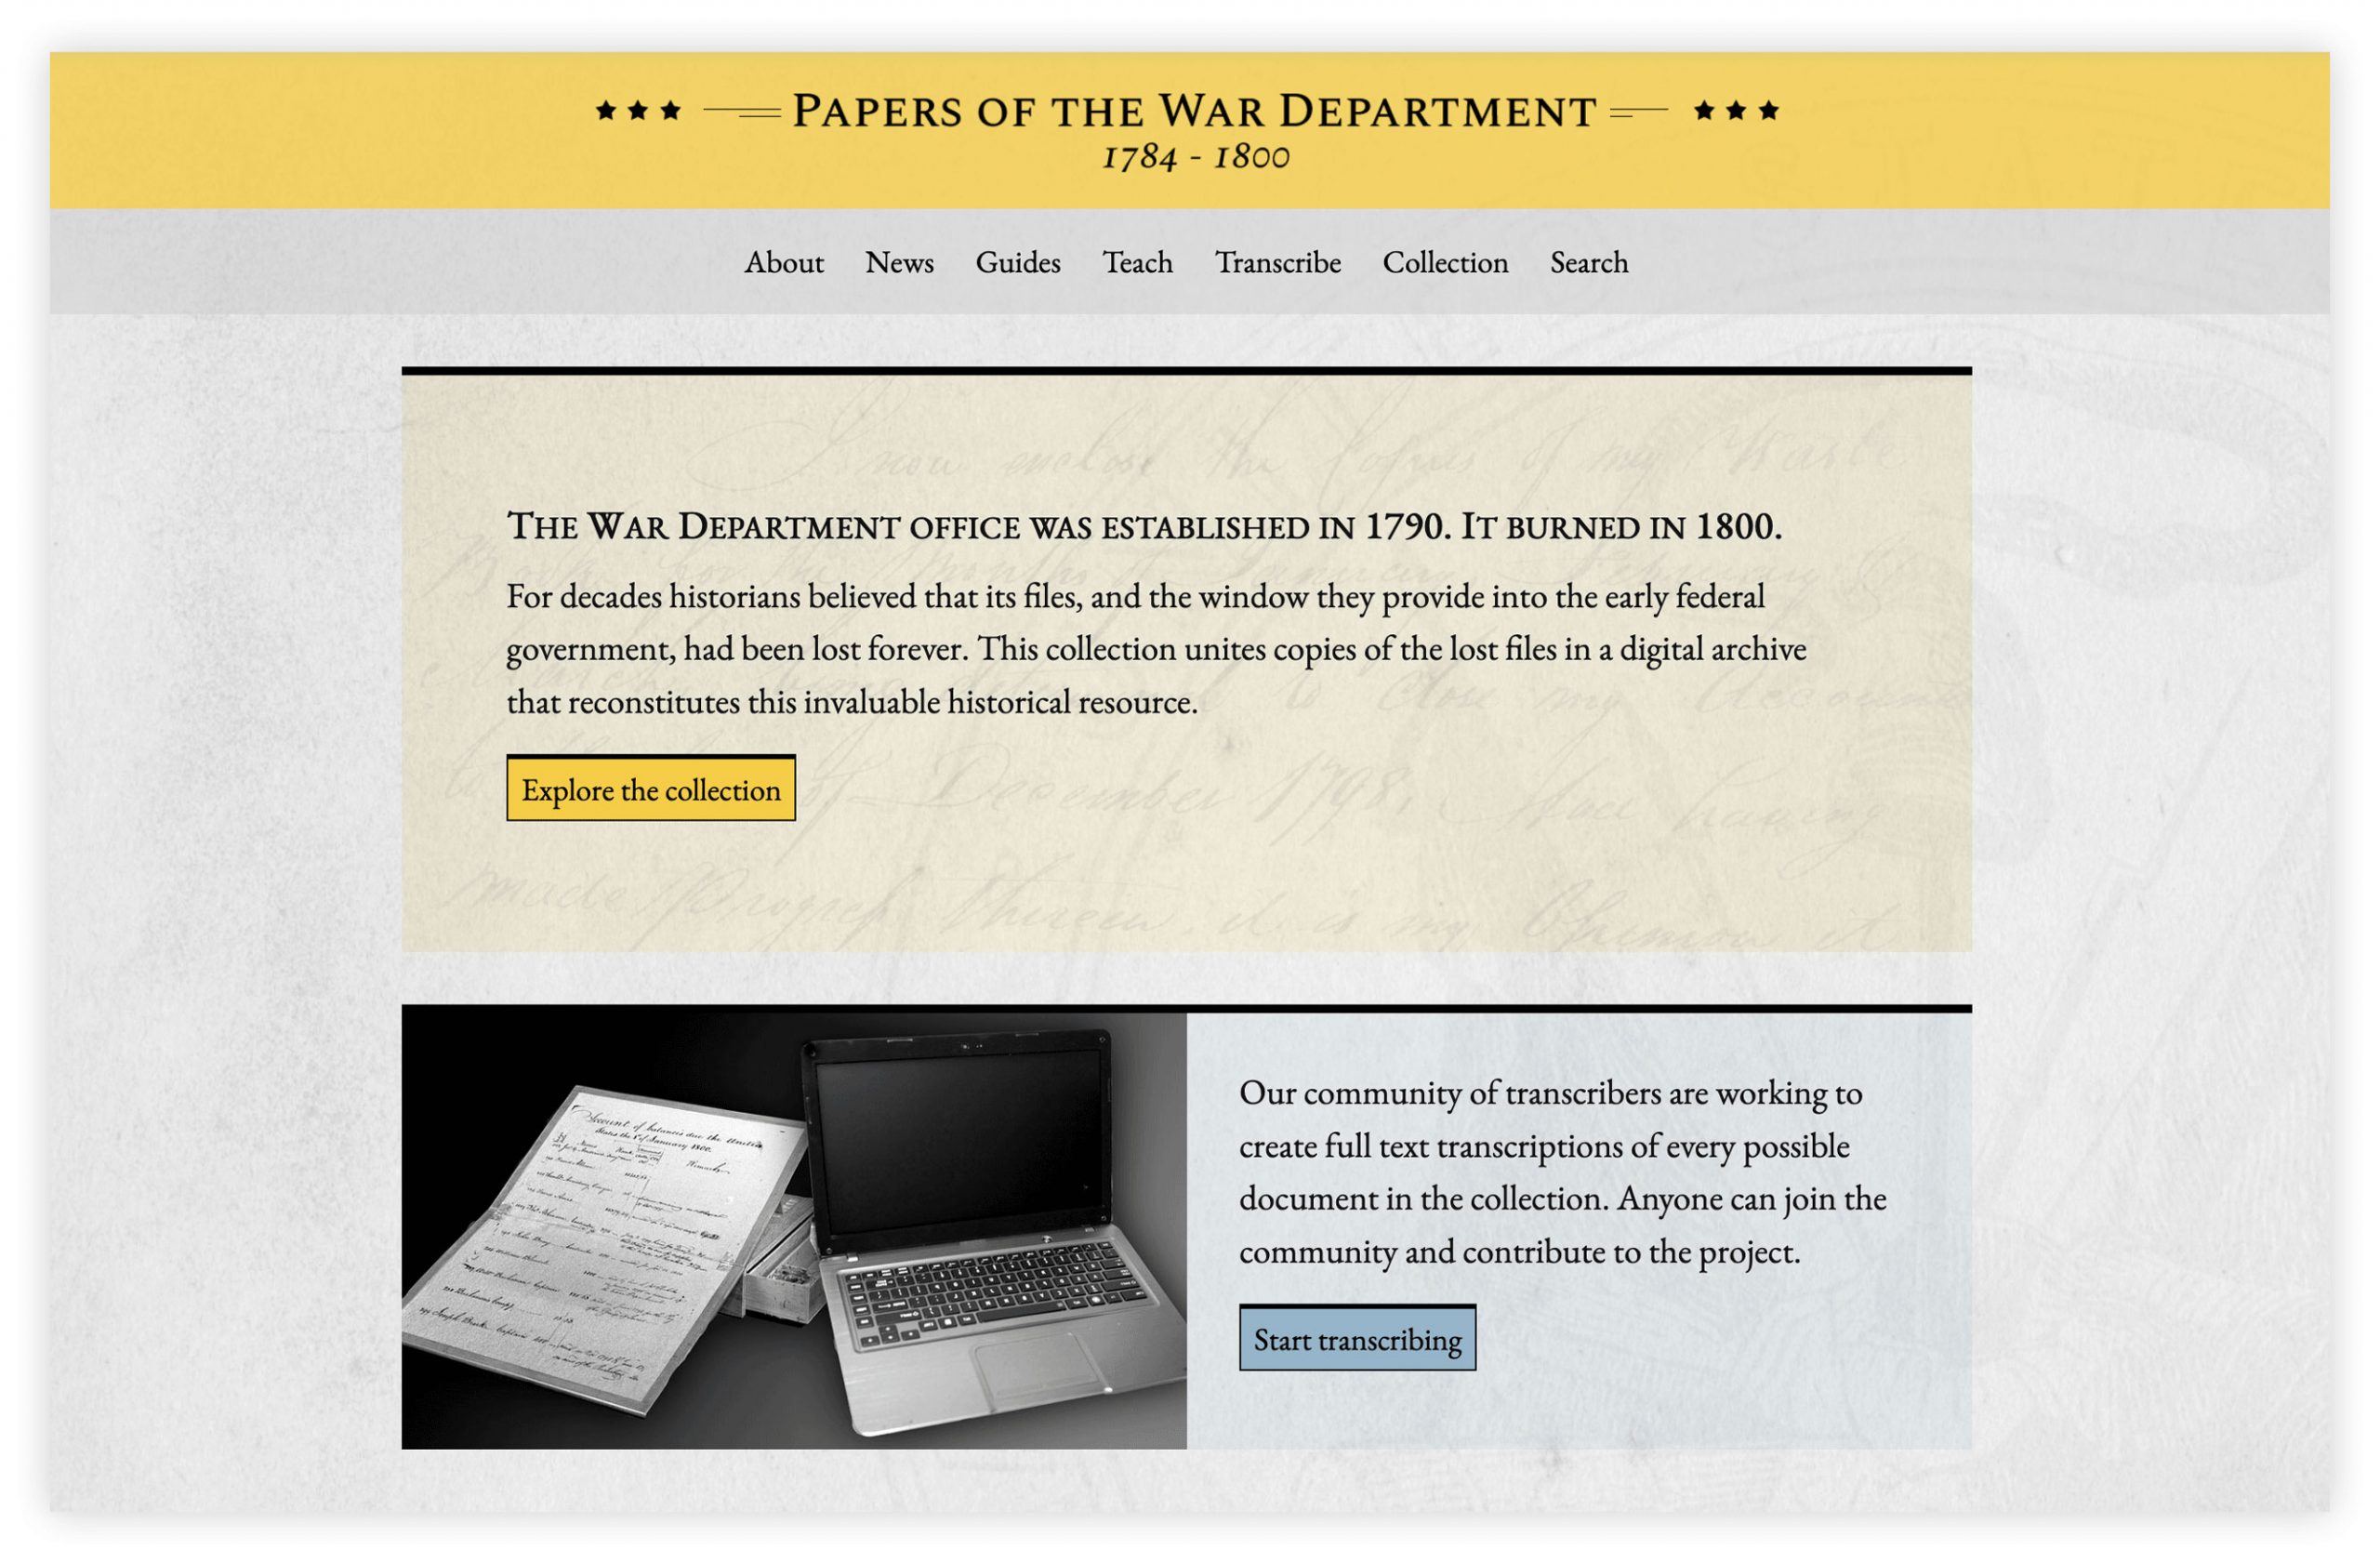 Screengrab of the Papers of the War Department website About page.